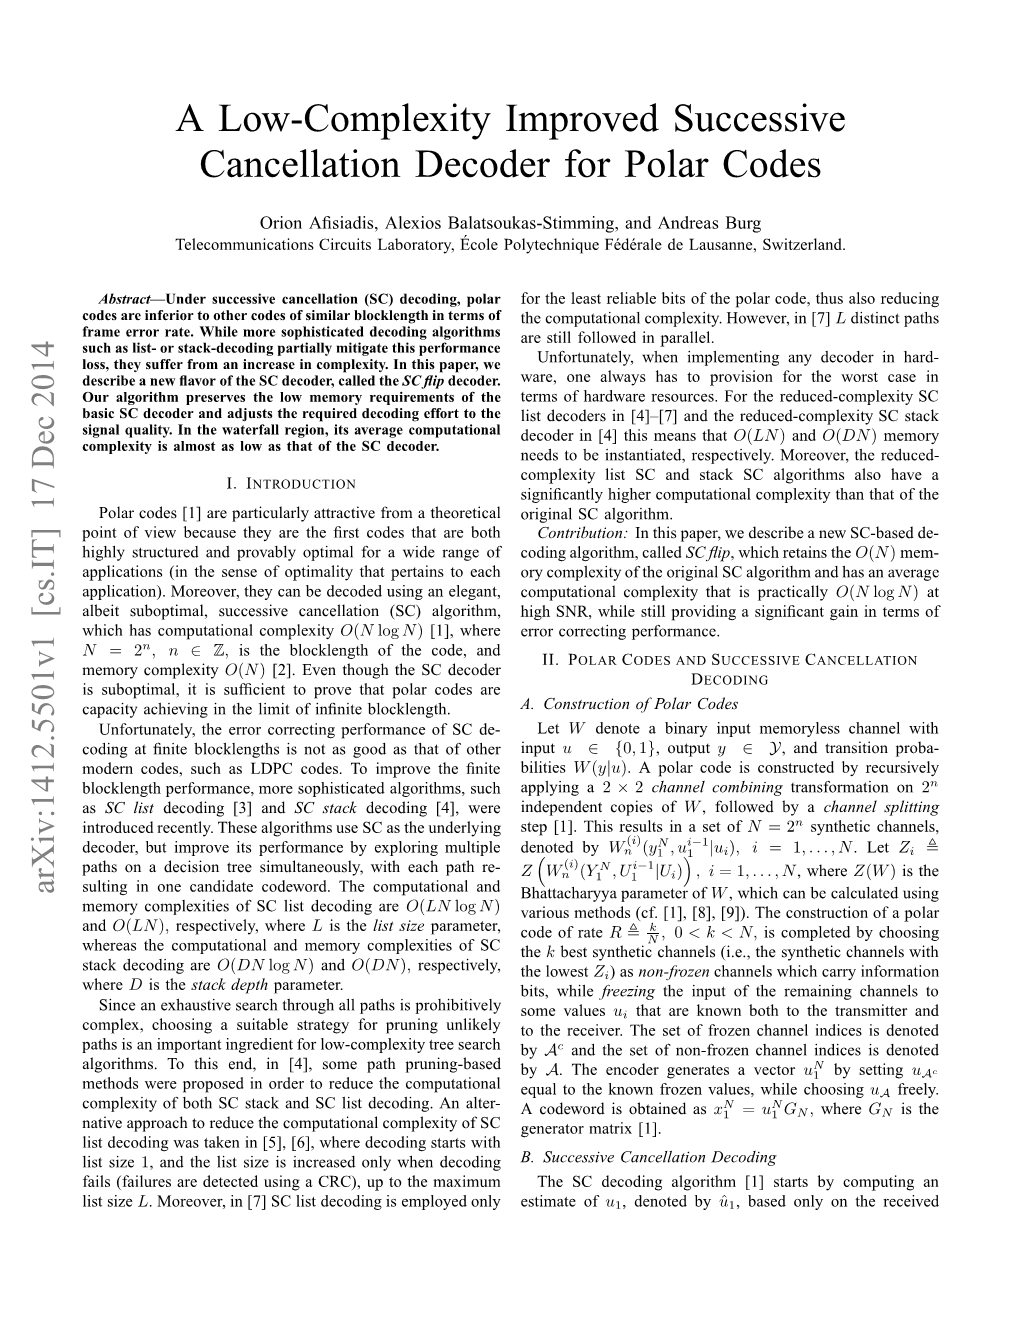 A Low-Complexity Improved Successive Cancellation Decoder